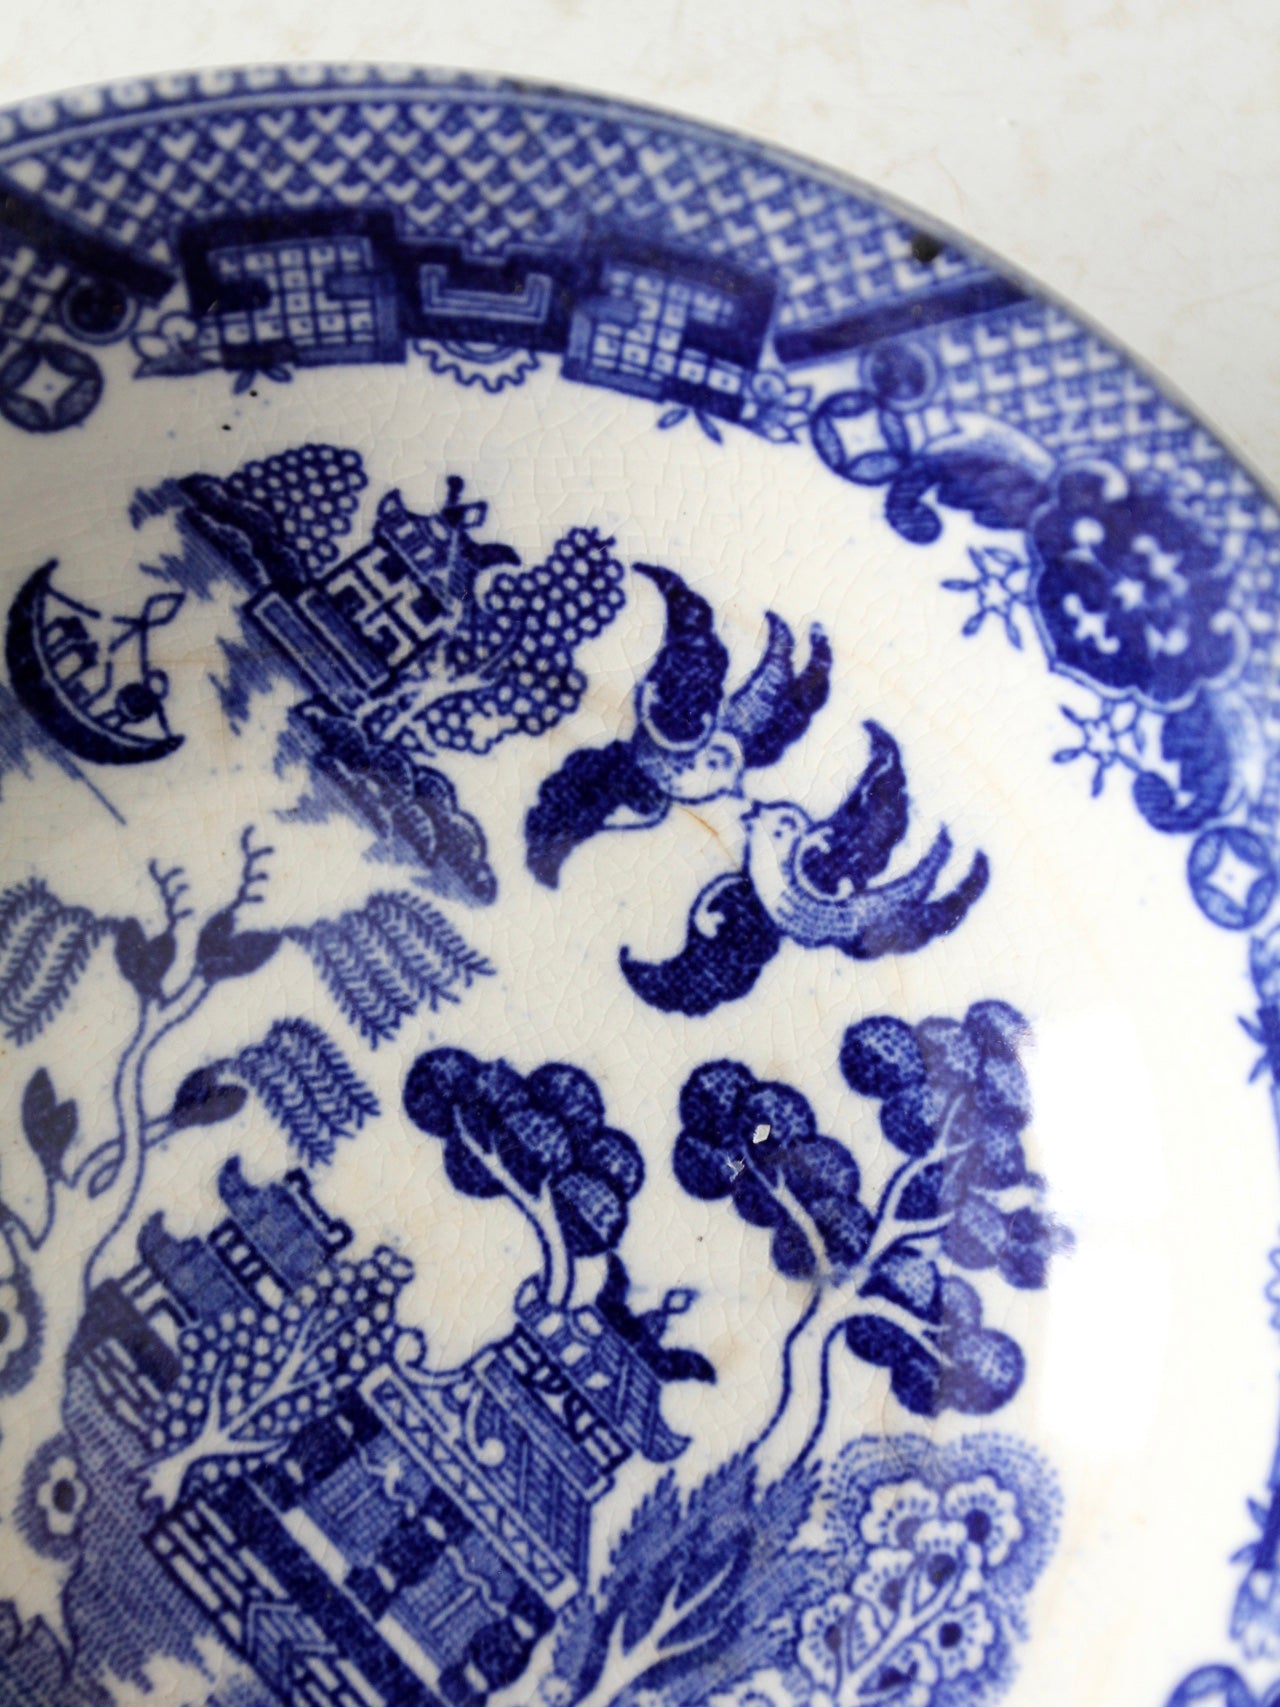 blue willow dishes